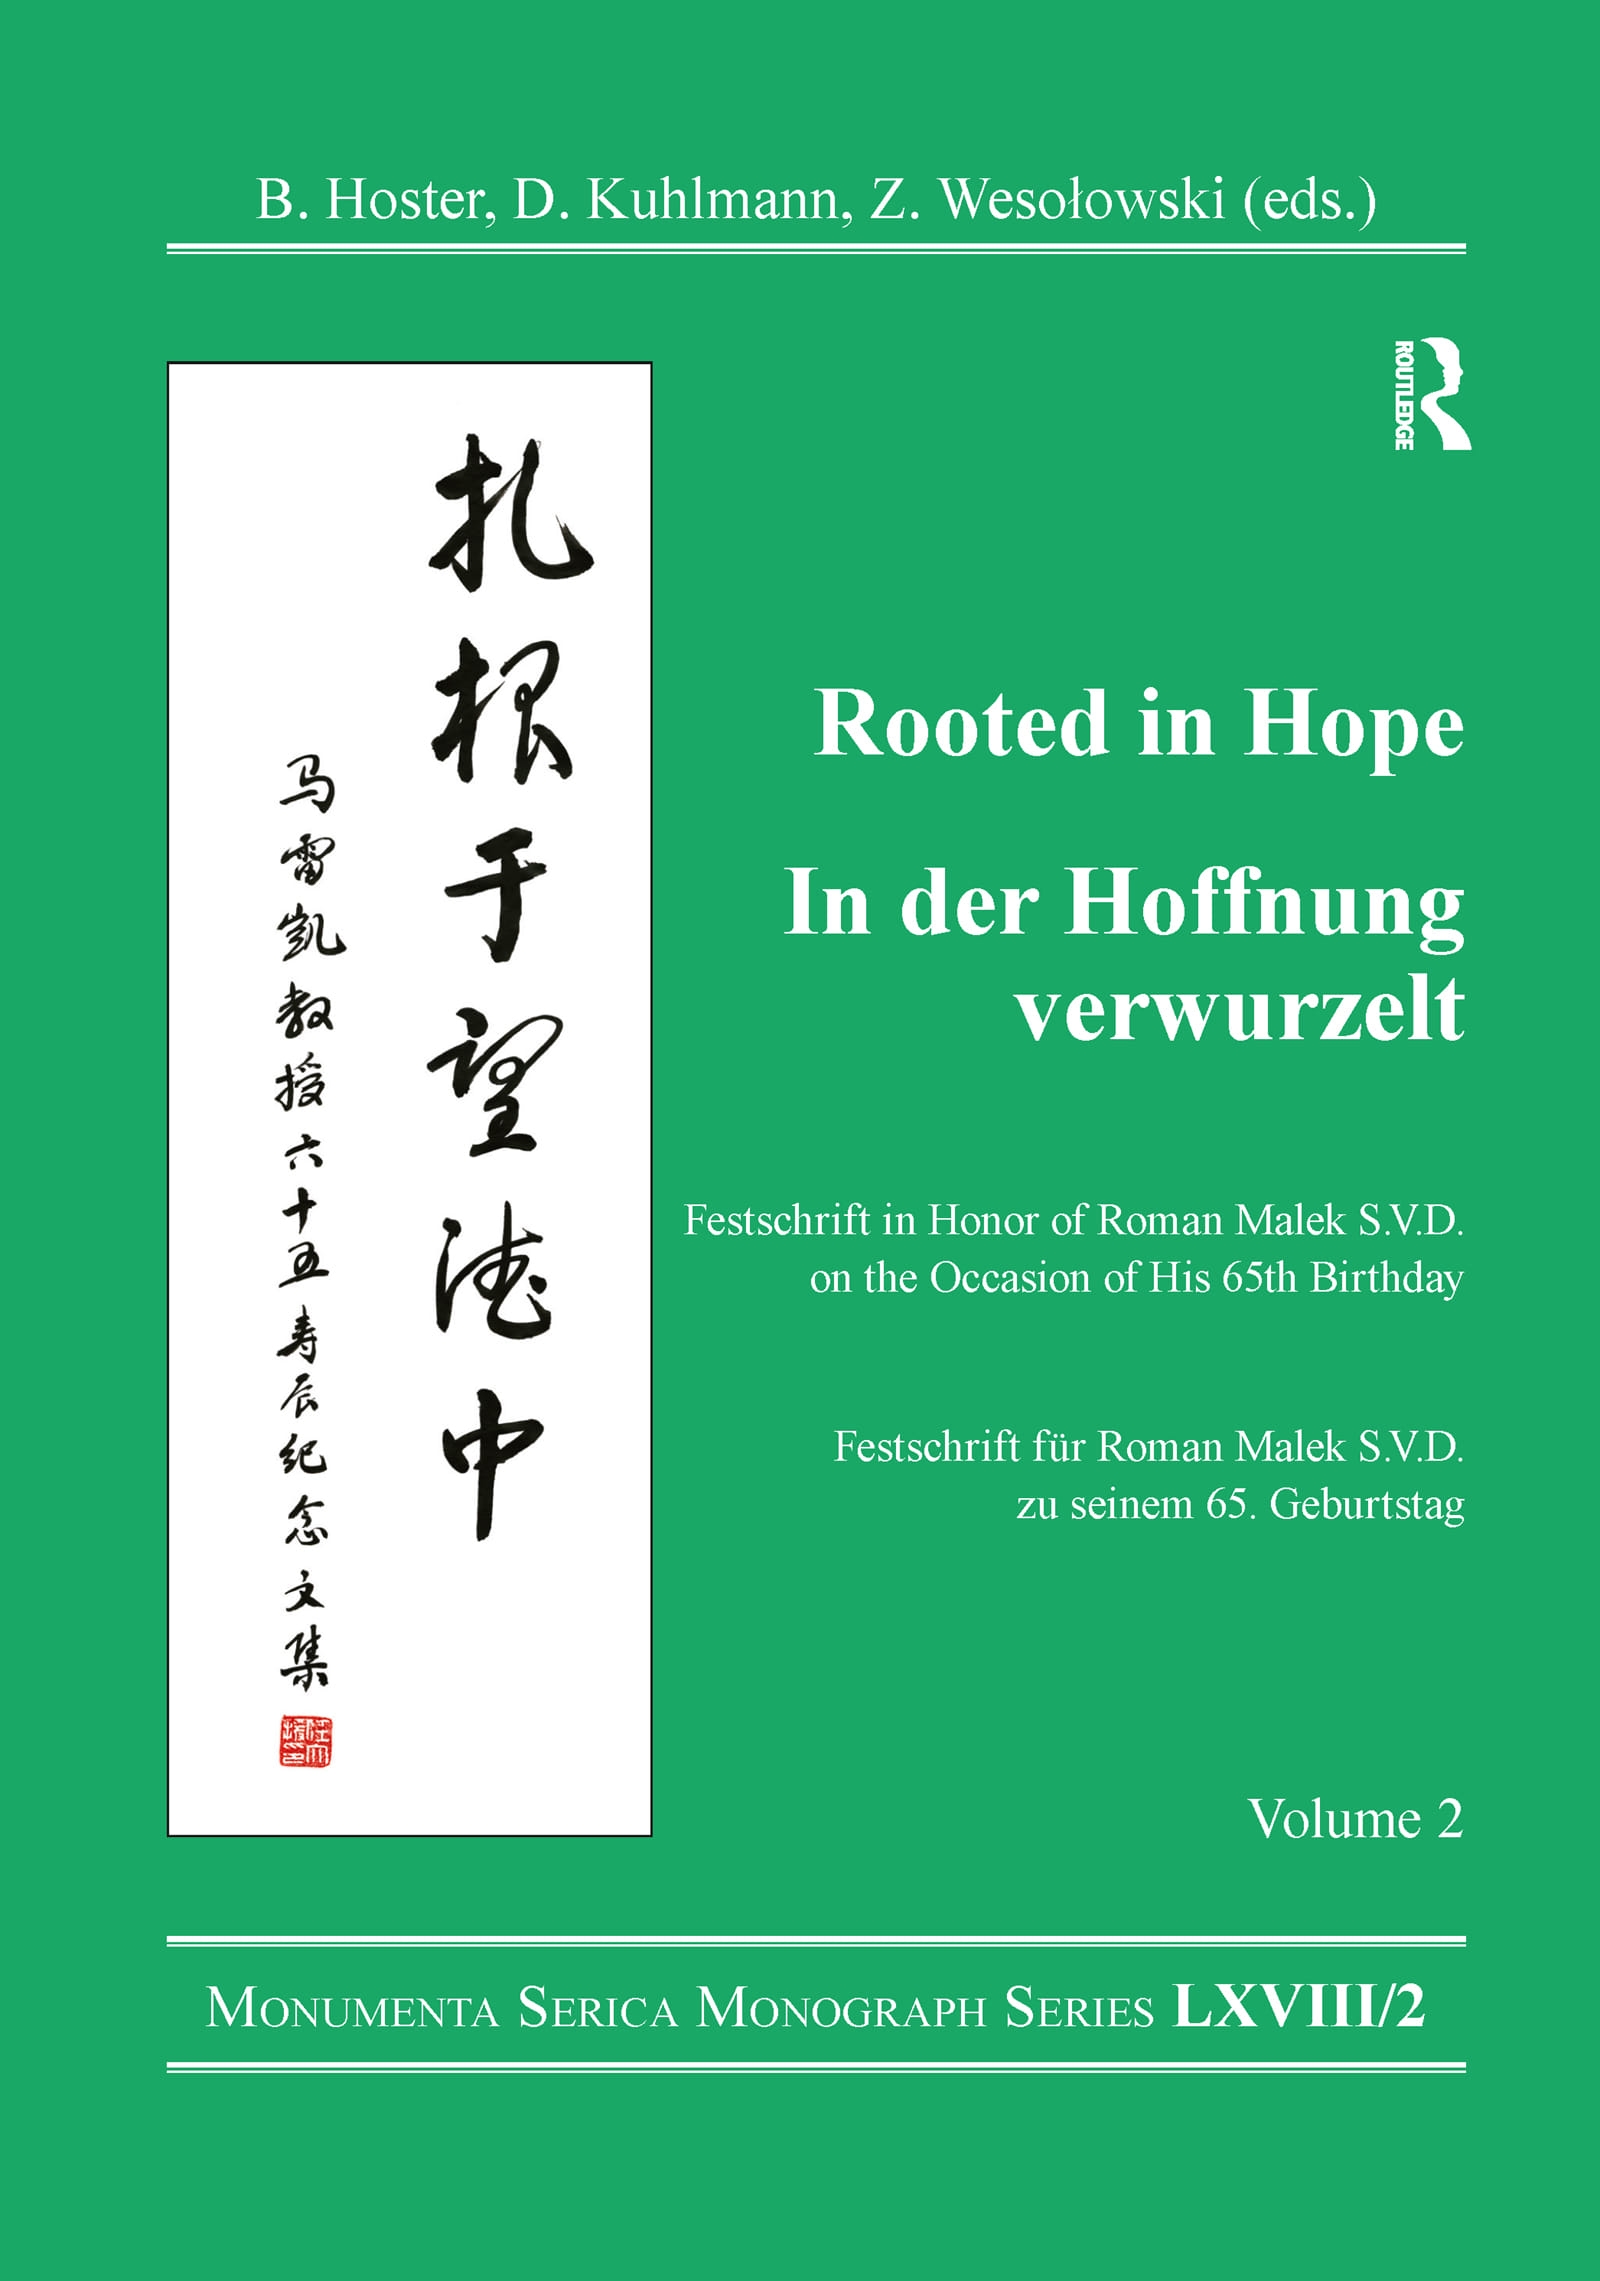 Rooted in Hope: China - Religion - Christianity Vol 2: Festschrift in Honor of Roman Malek S.V.D. on the Occasion of His 65th Birthday